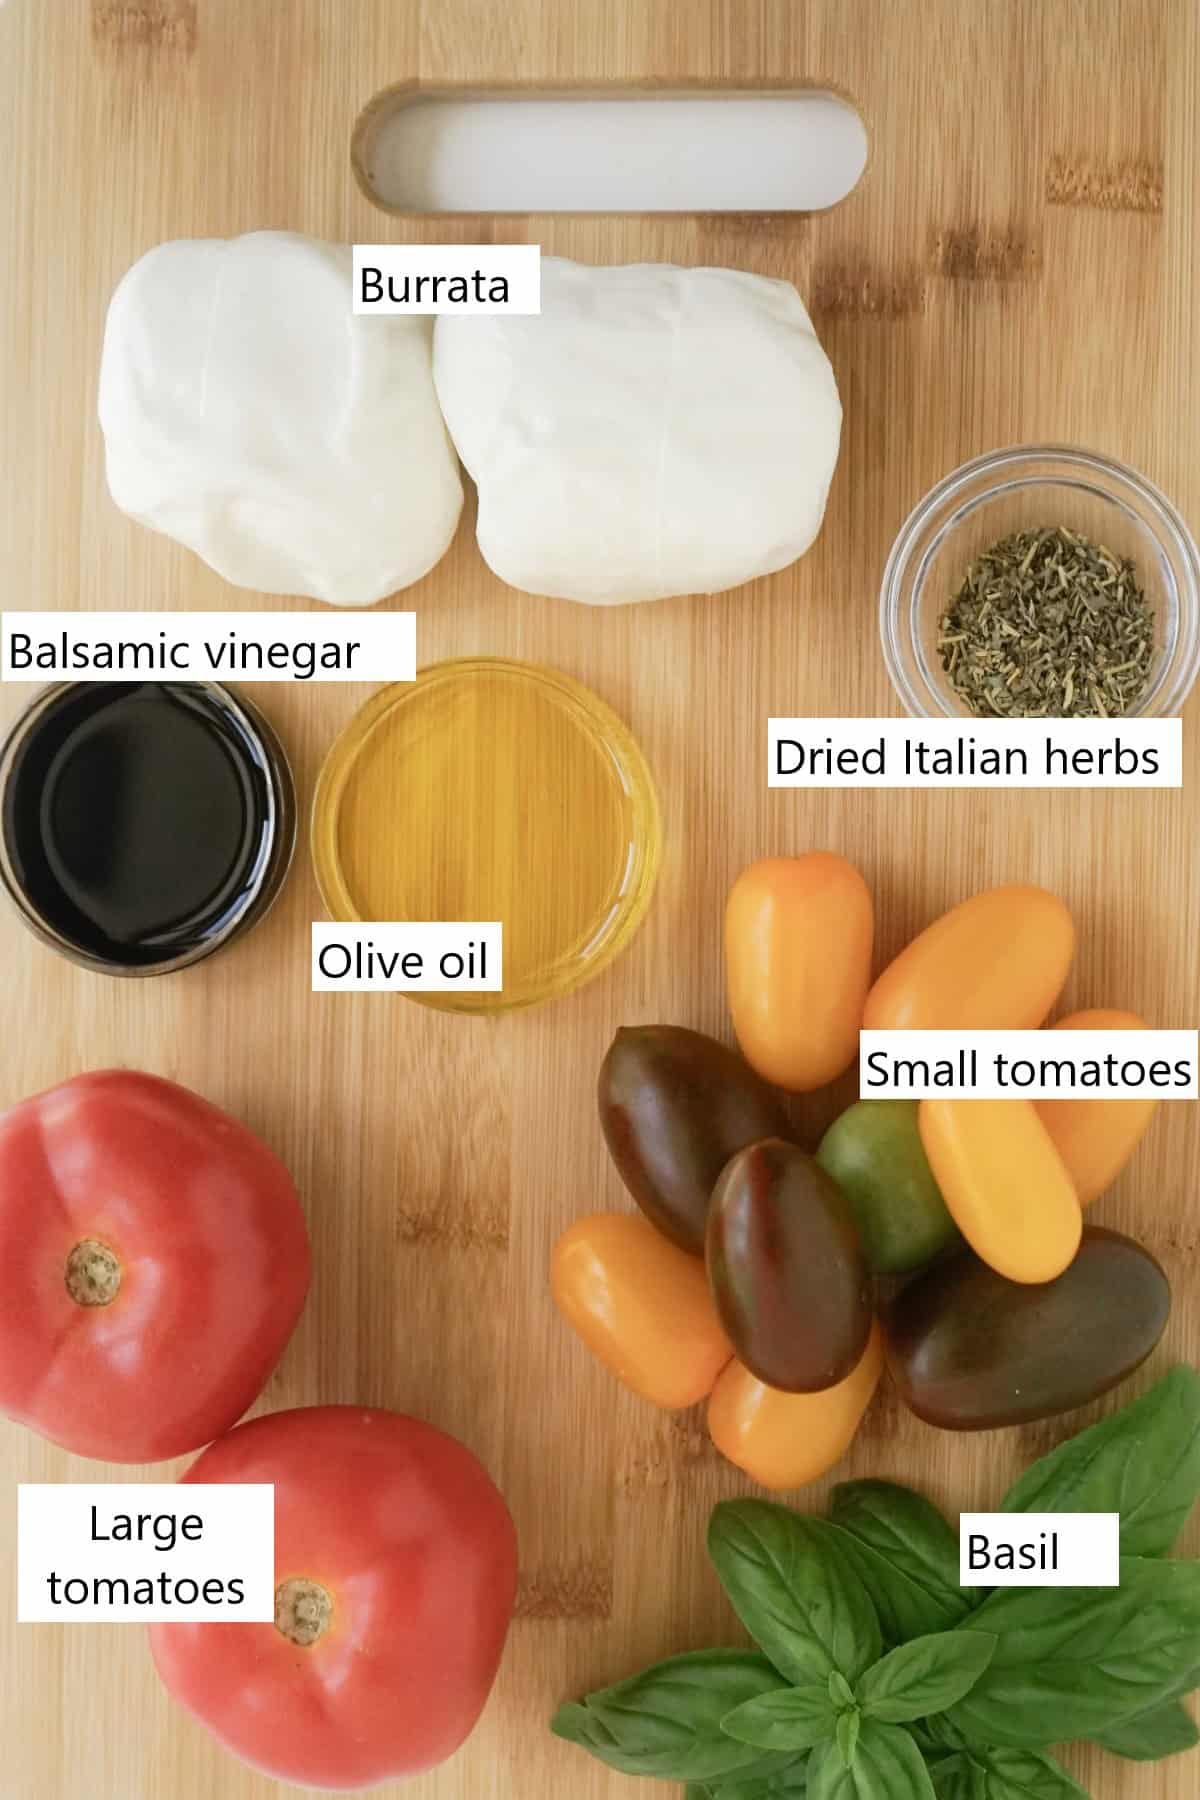 Ingredients for make a burrata caprese on a wooden cutting board.